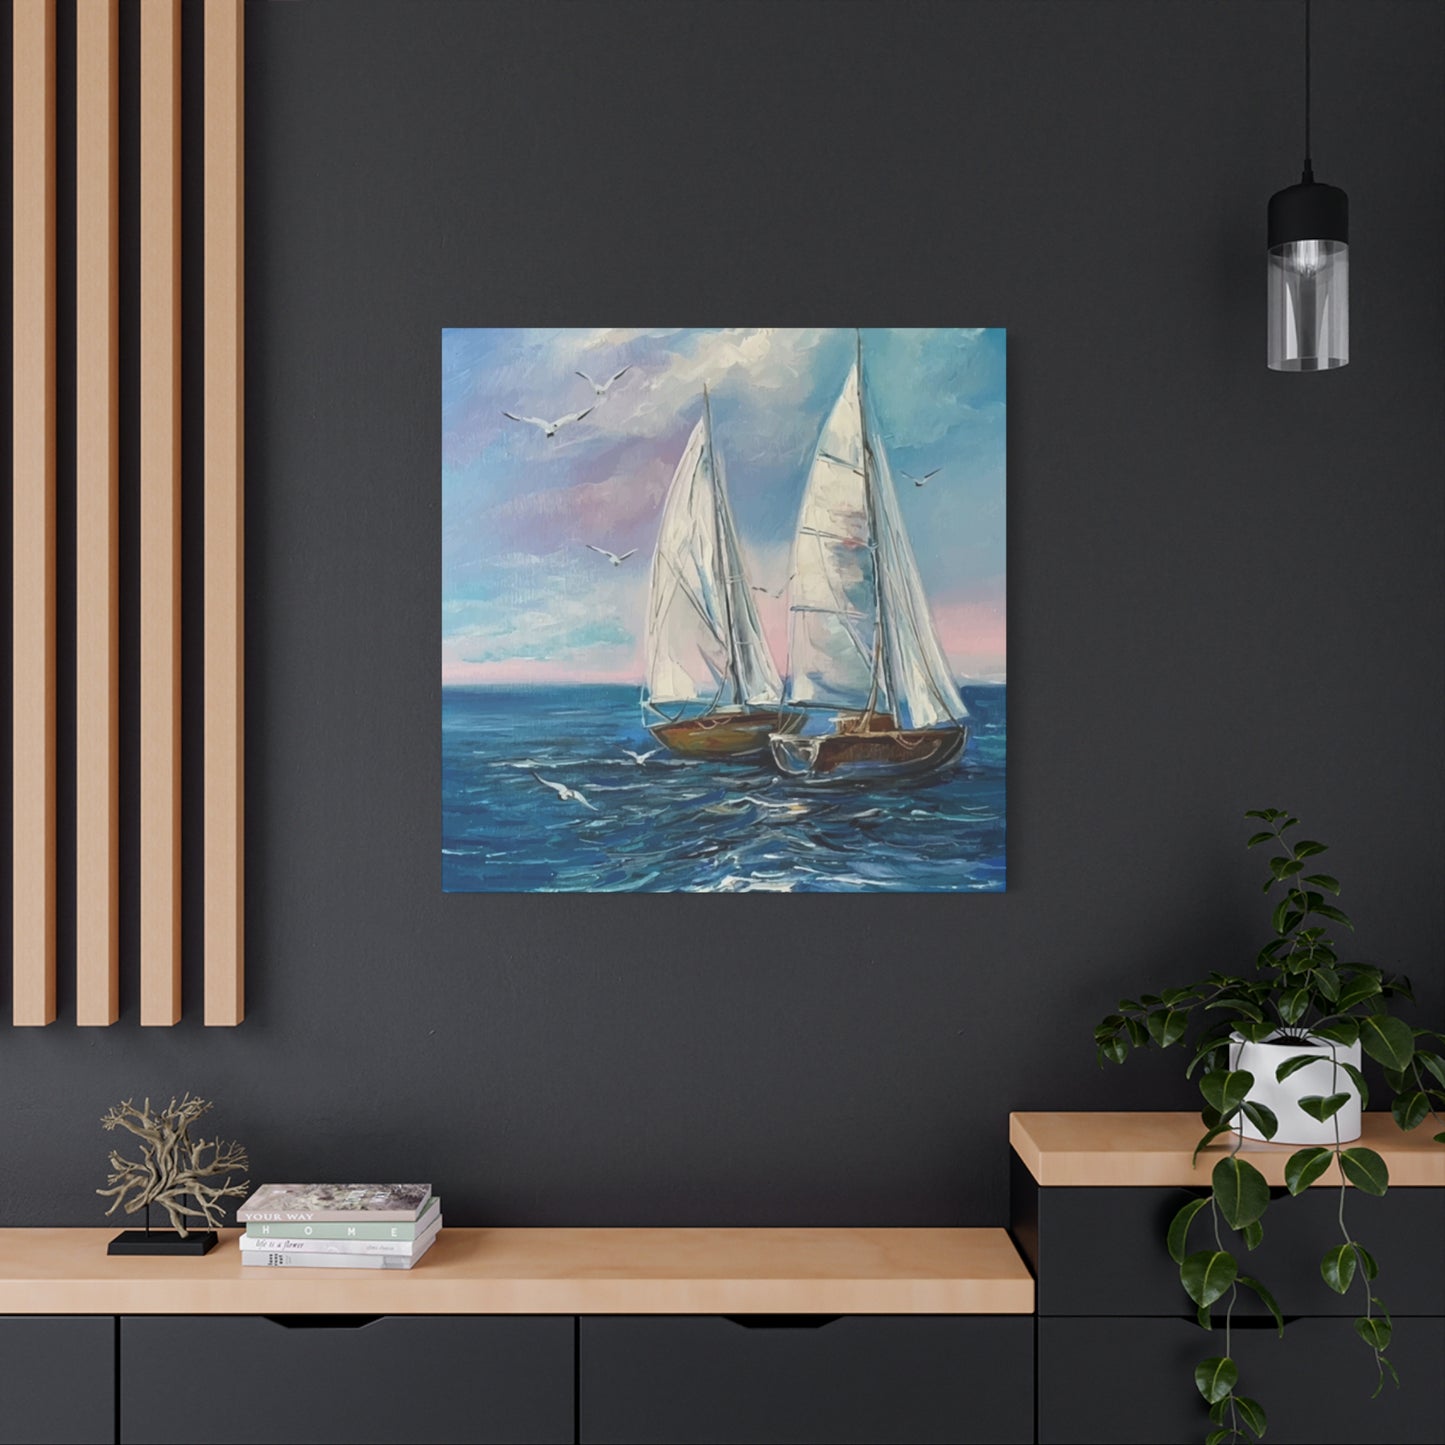 Two Boats In Sea Wall Art & Canvas Prints